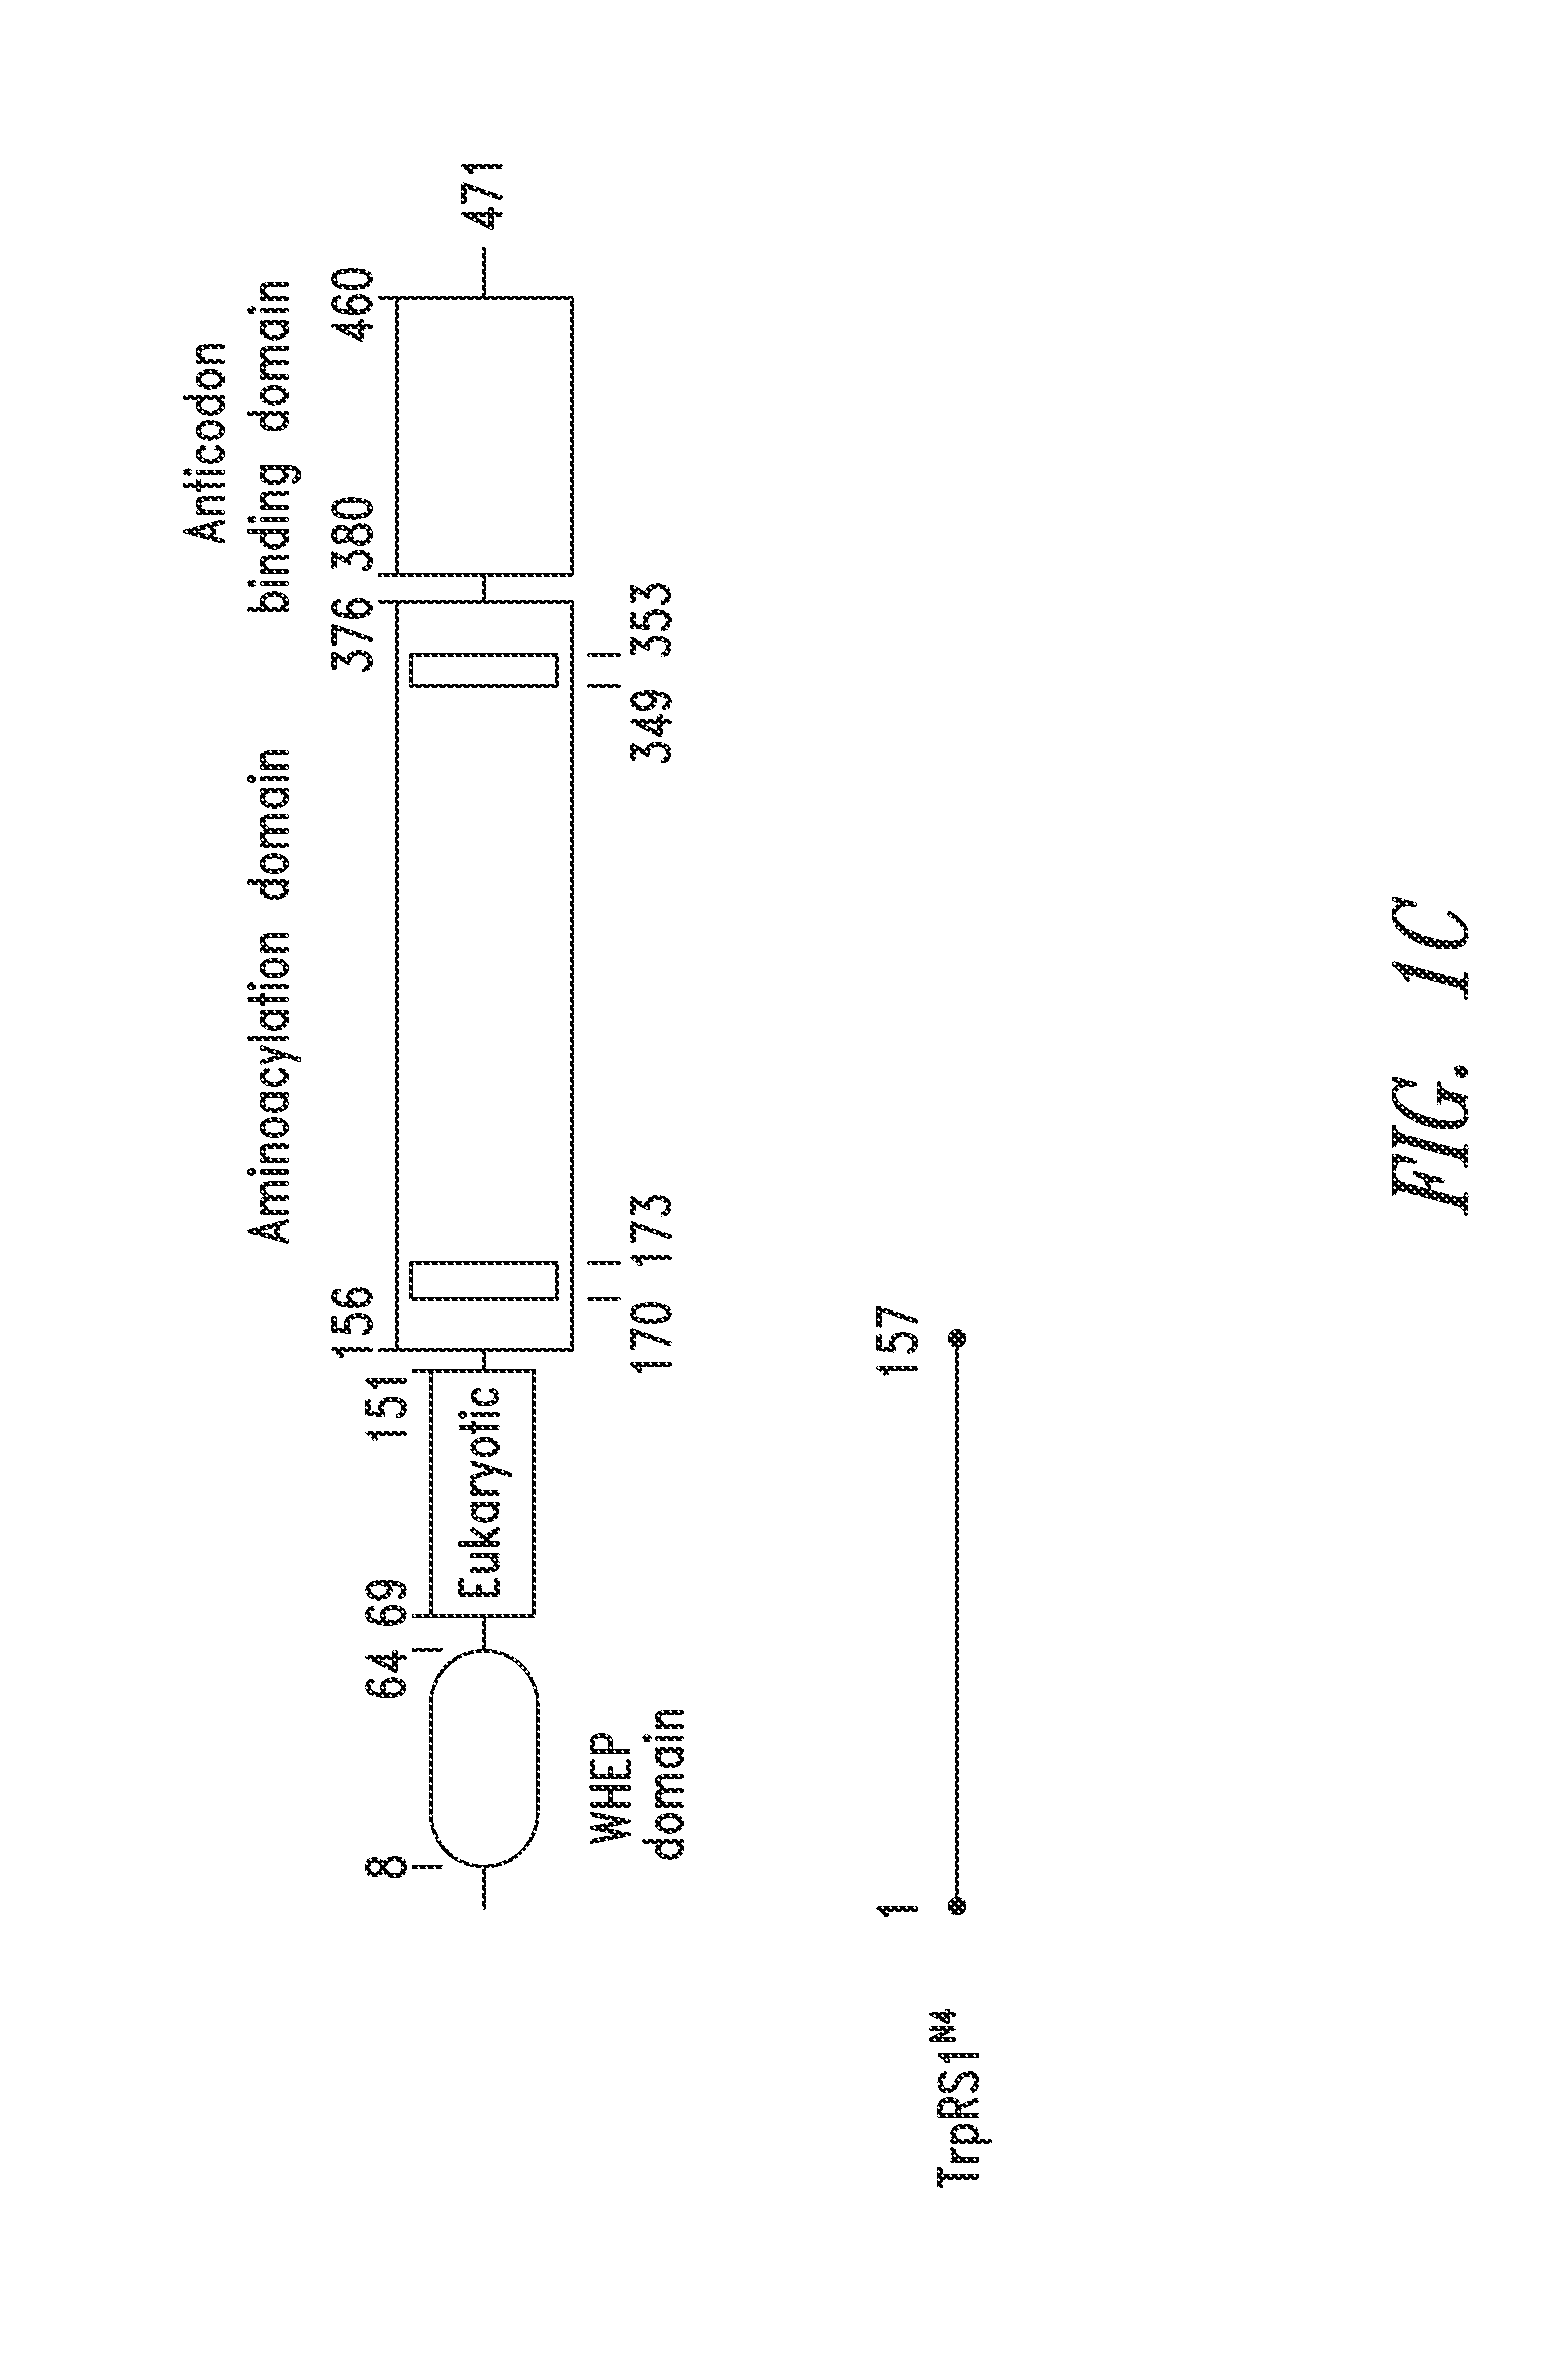 Innovative discovery of therapeutic, diagnostic, and antibody compositions related to protein fragments of tryptophanyl-trna synthetases